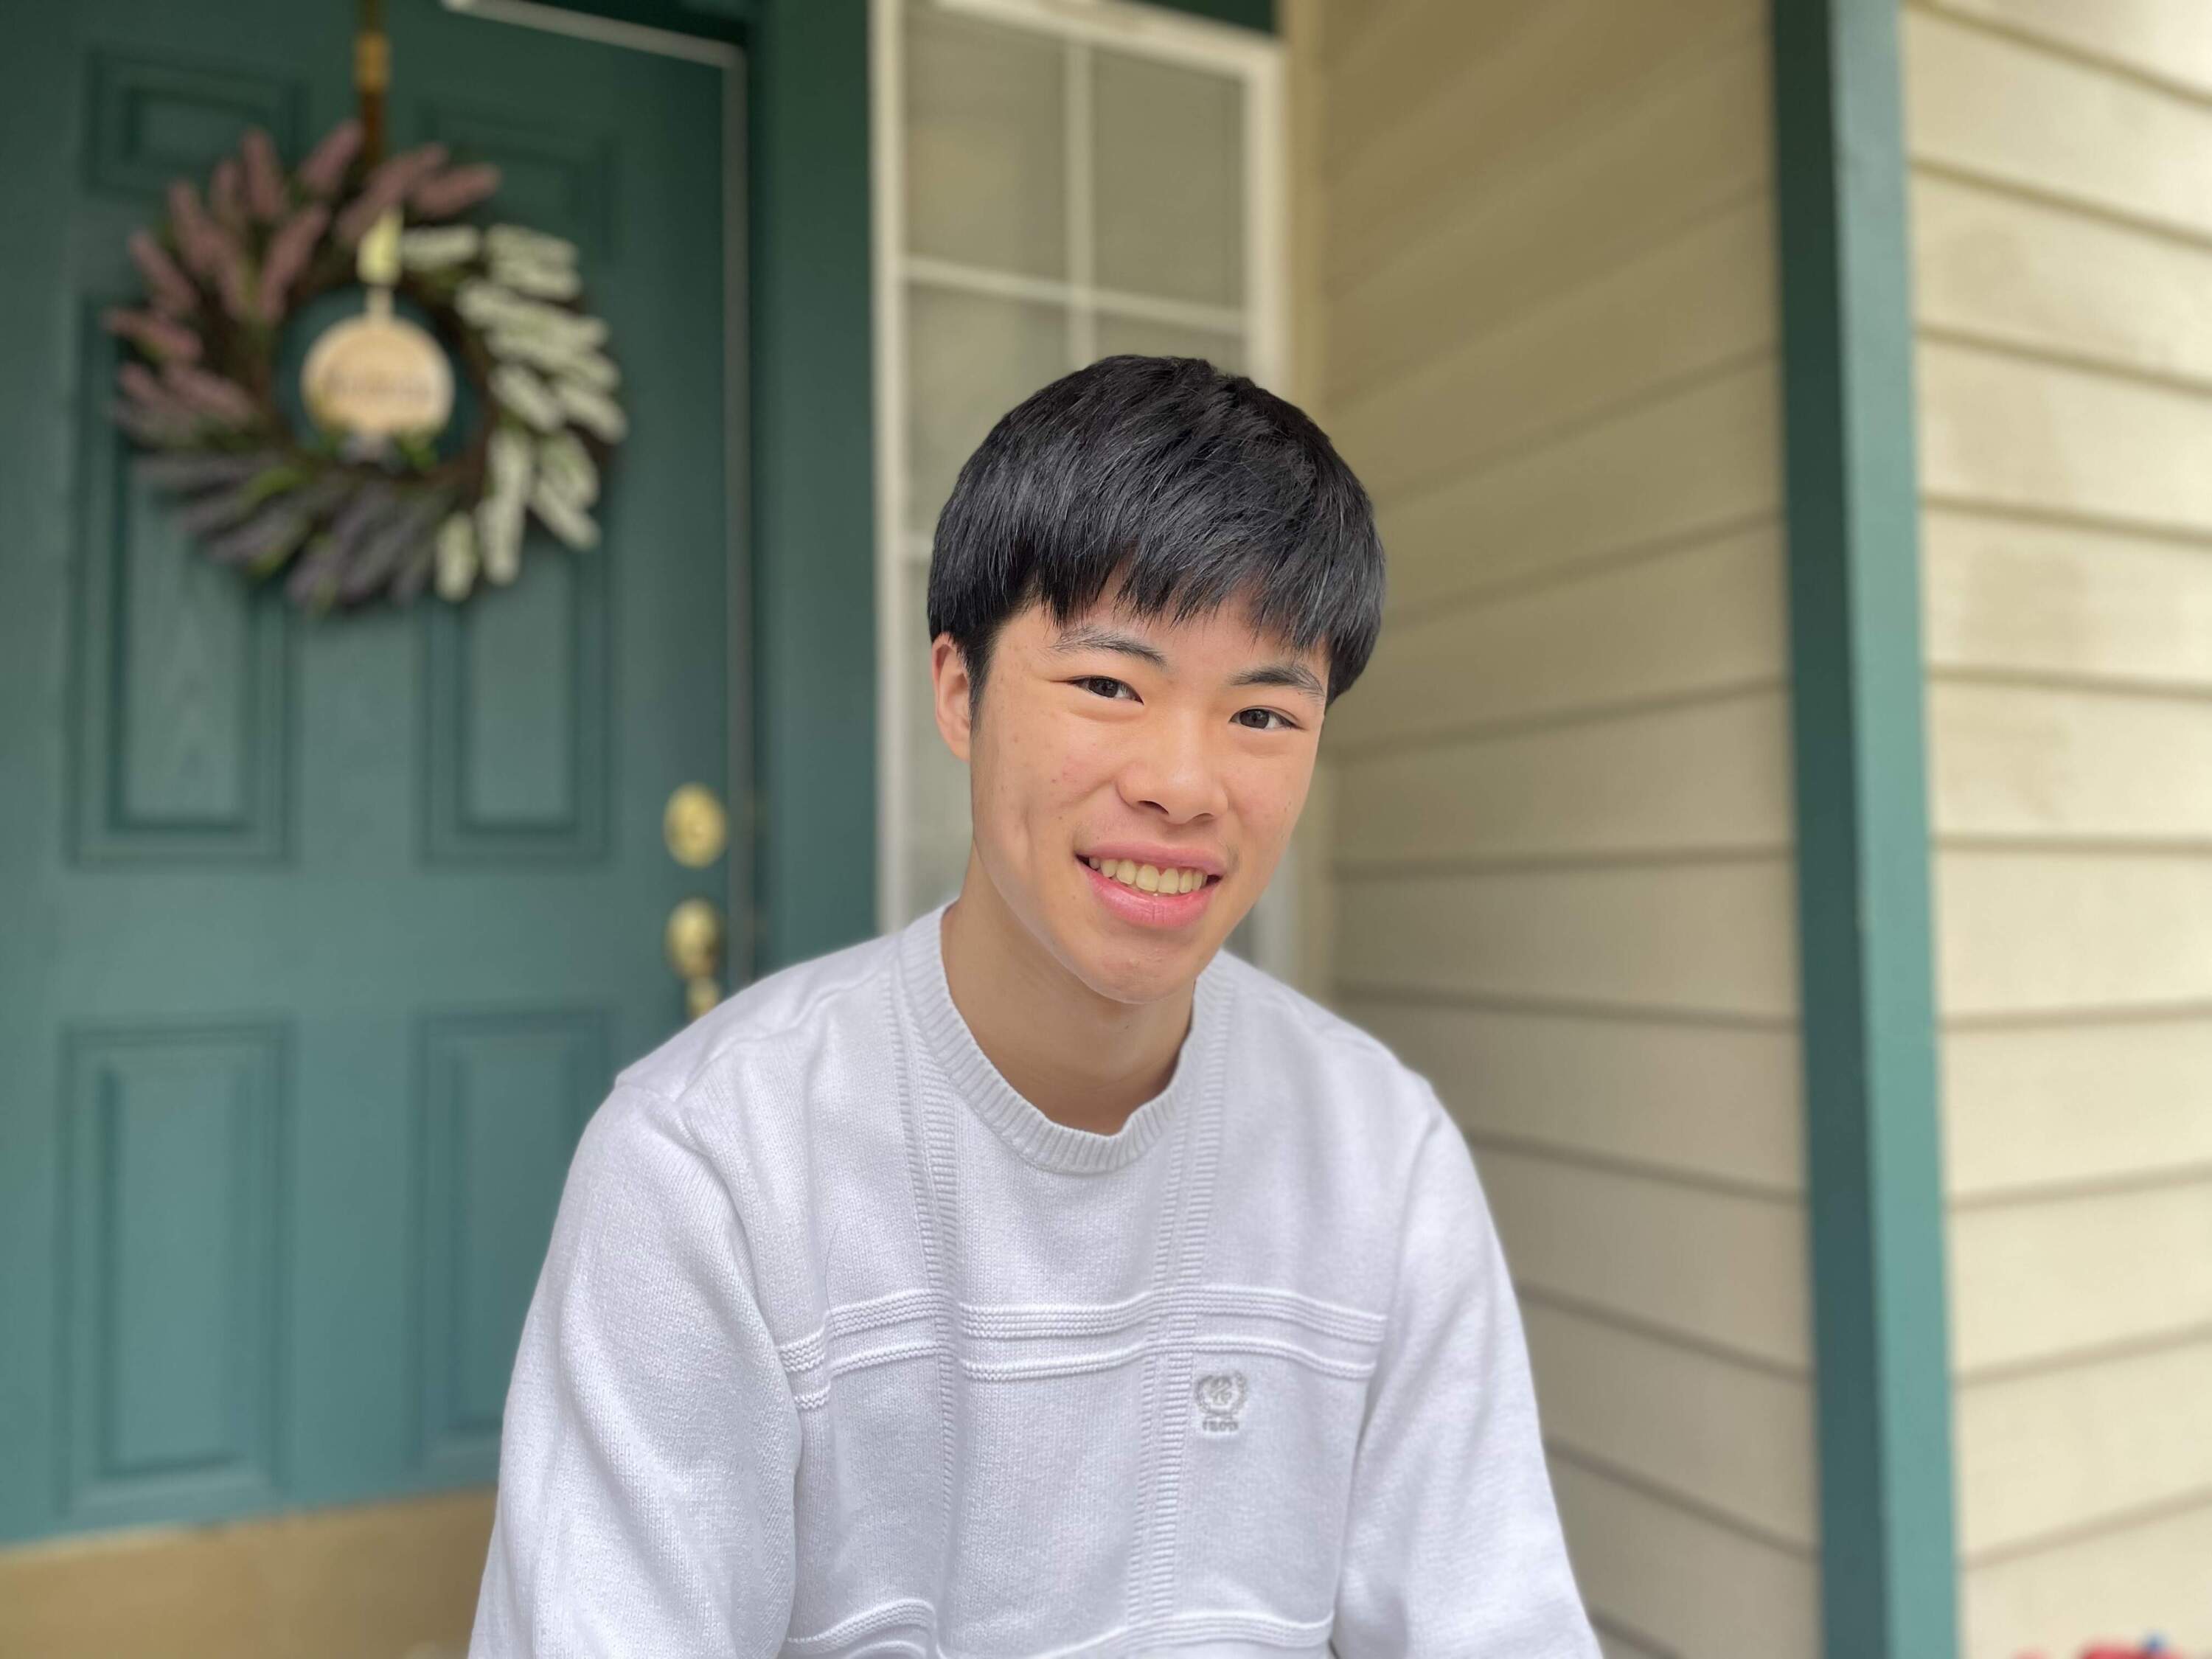 Senior Aaron Ton says his sister will benefit if Washington state lawmakers pass a bill requiring schools to teach financial literacy. (Courtesy of Aaron Ton)